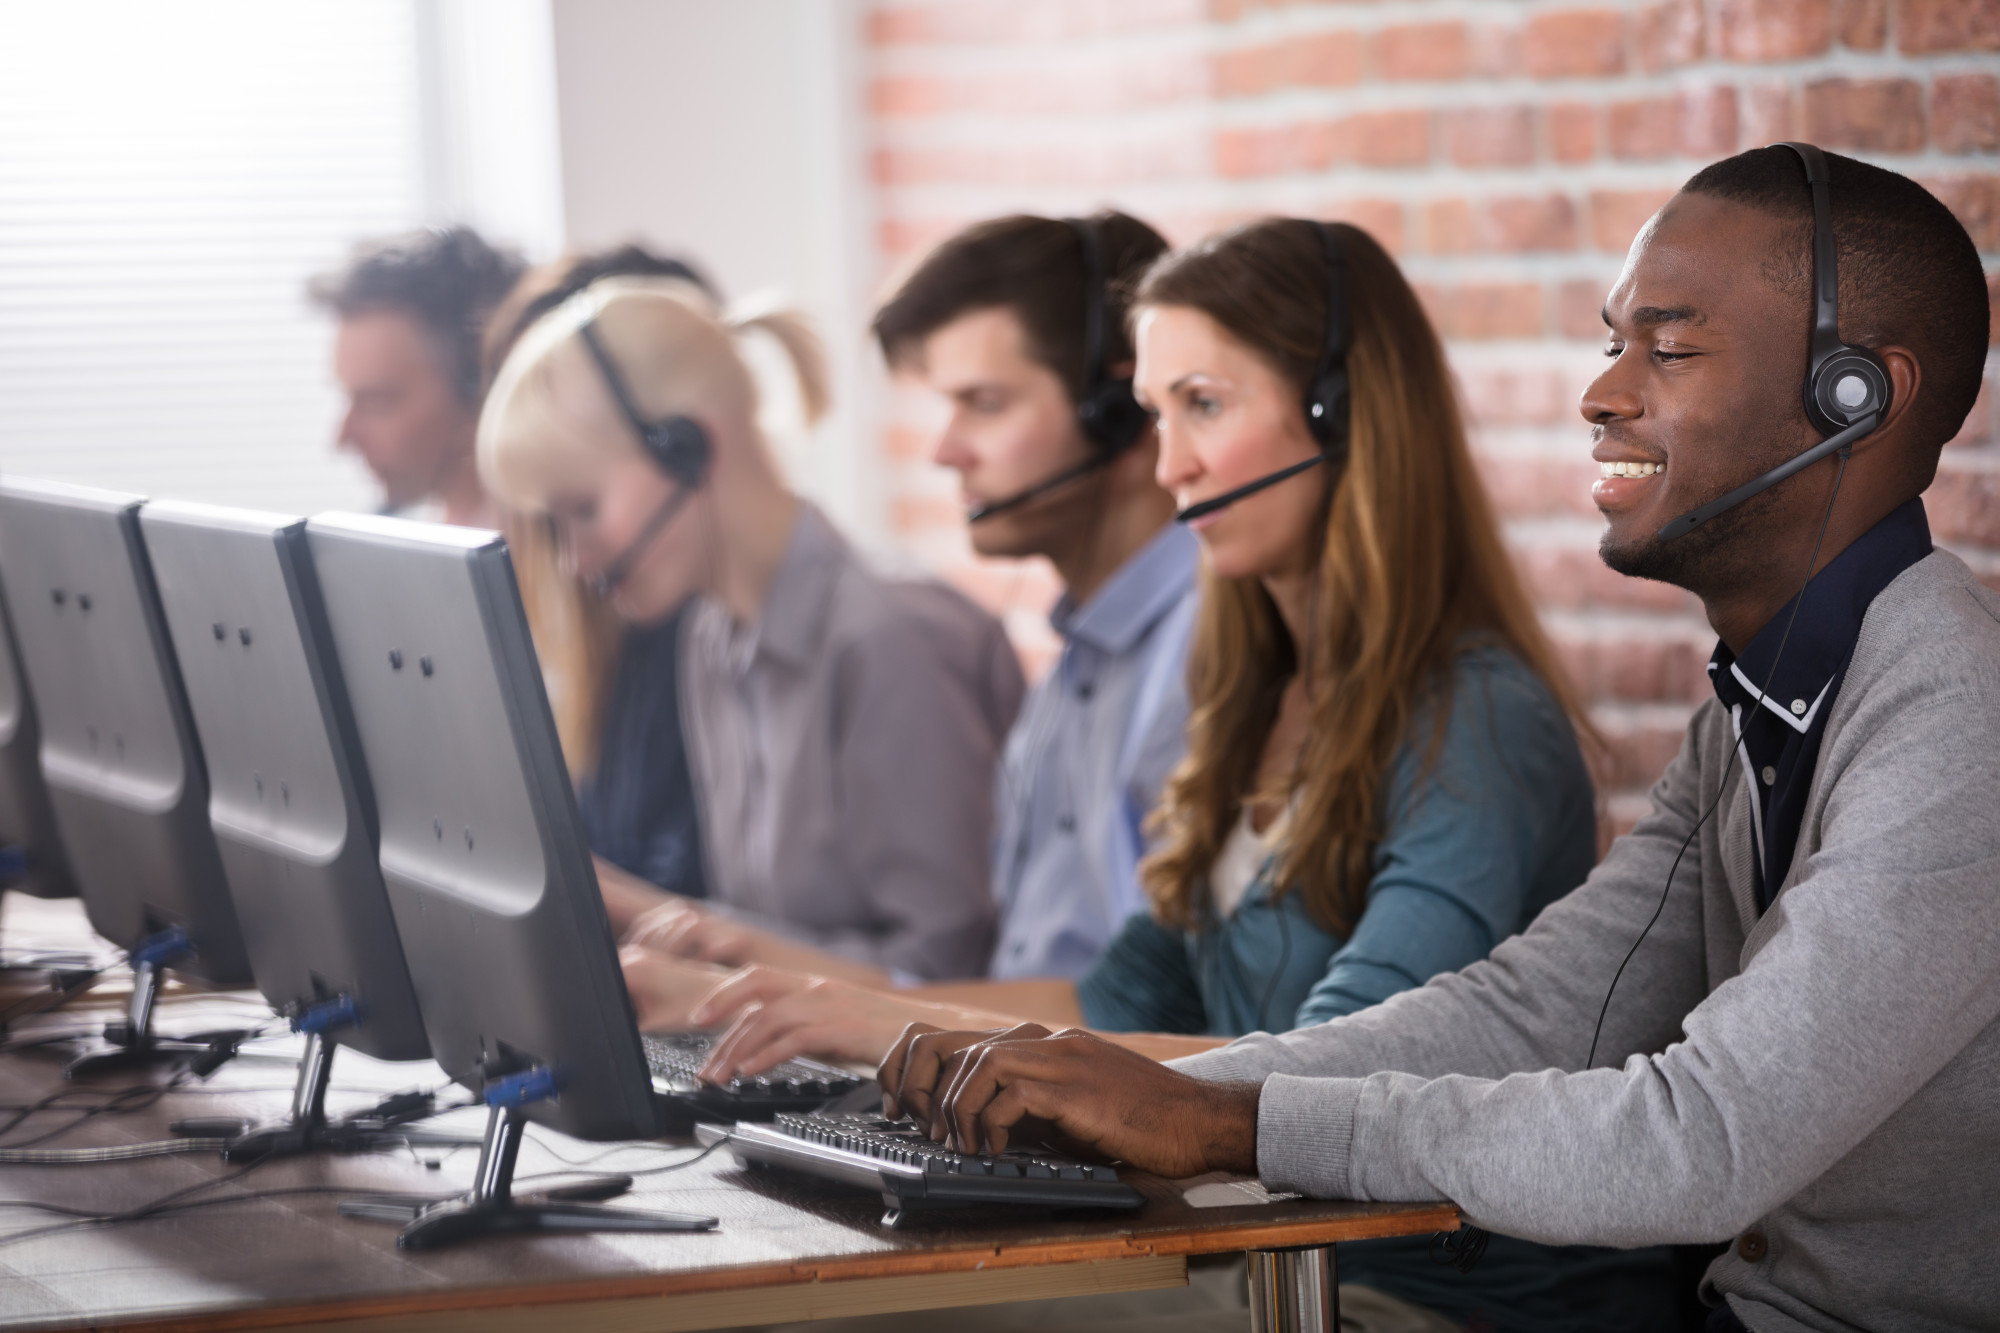 Answering Service vs. Call Center: What The Difference? | Find Answering Service